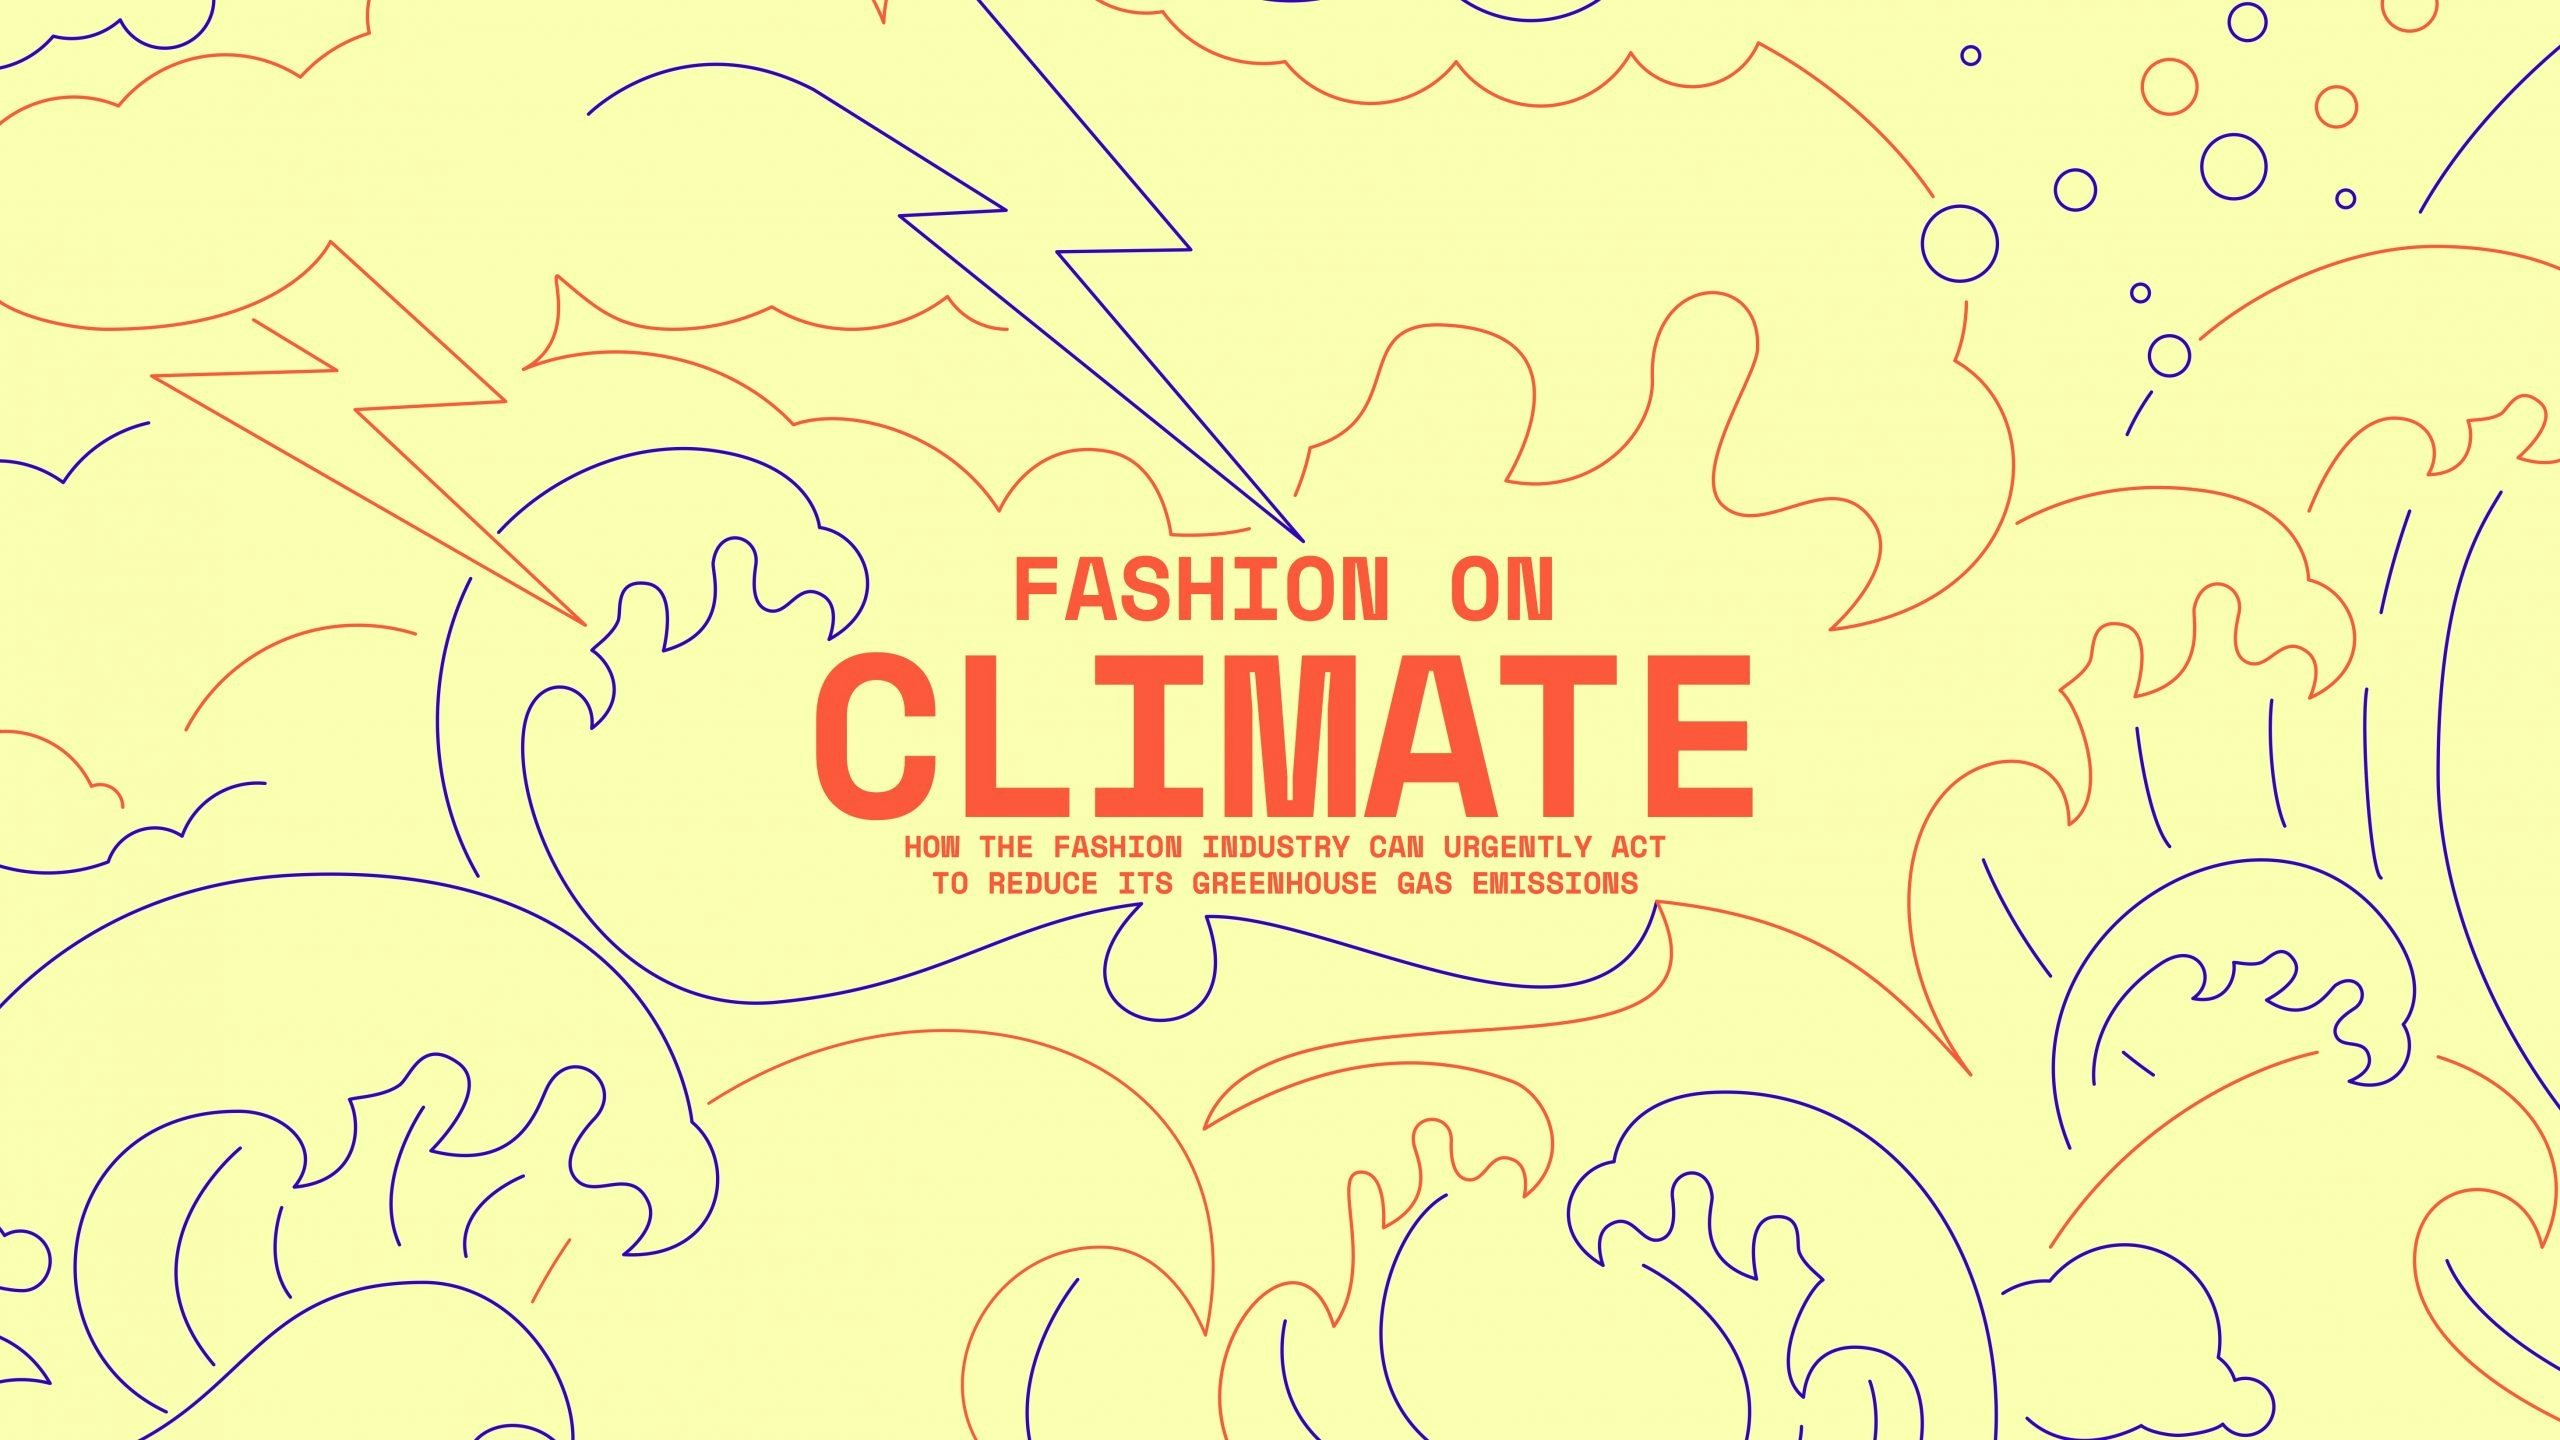 Climate experts have been warning the world about climate change for decades, but now, the fashion industry is finally ready to address these issues. Photo: McKinsey
